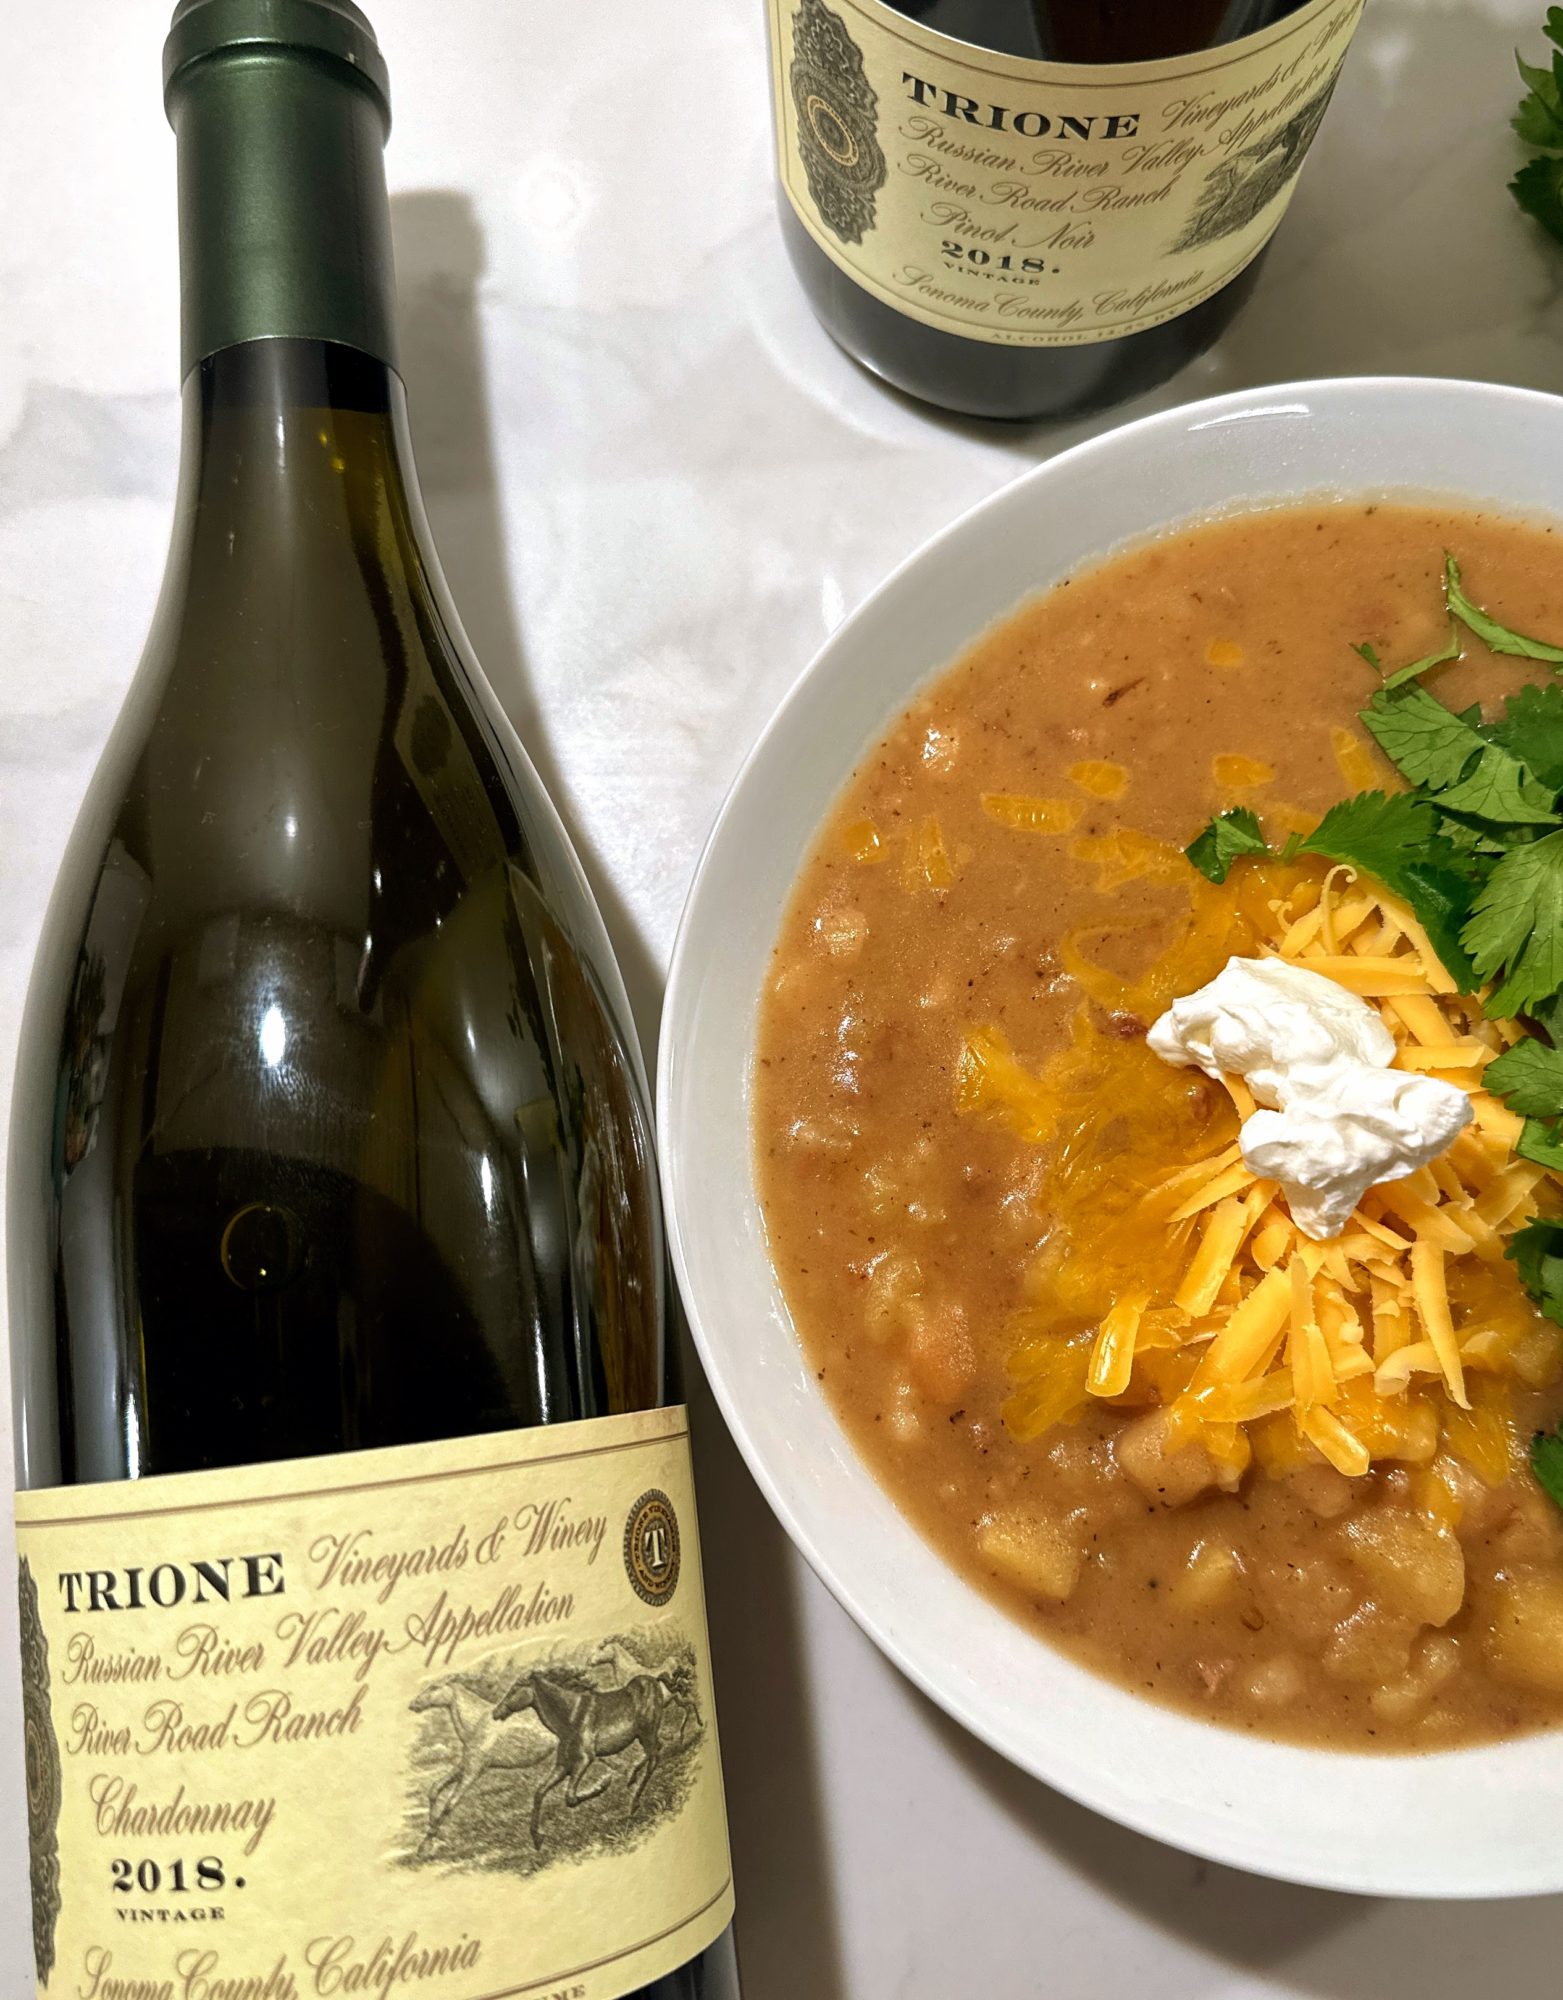 Two bottles of wine with a bowl of soup that has cheese, sour cram and cilantro as garnish.